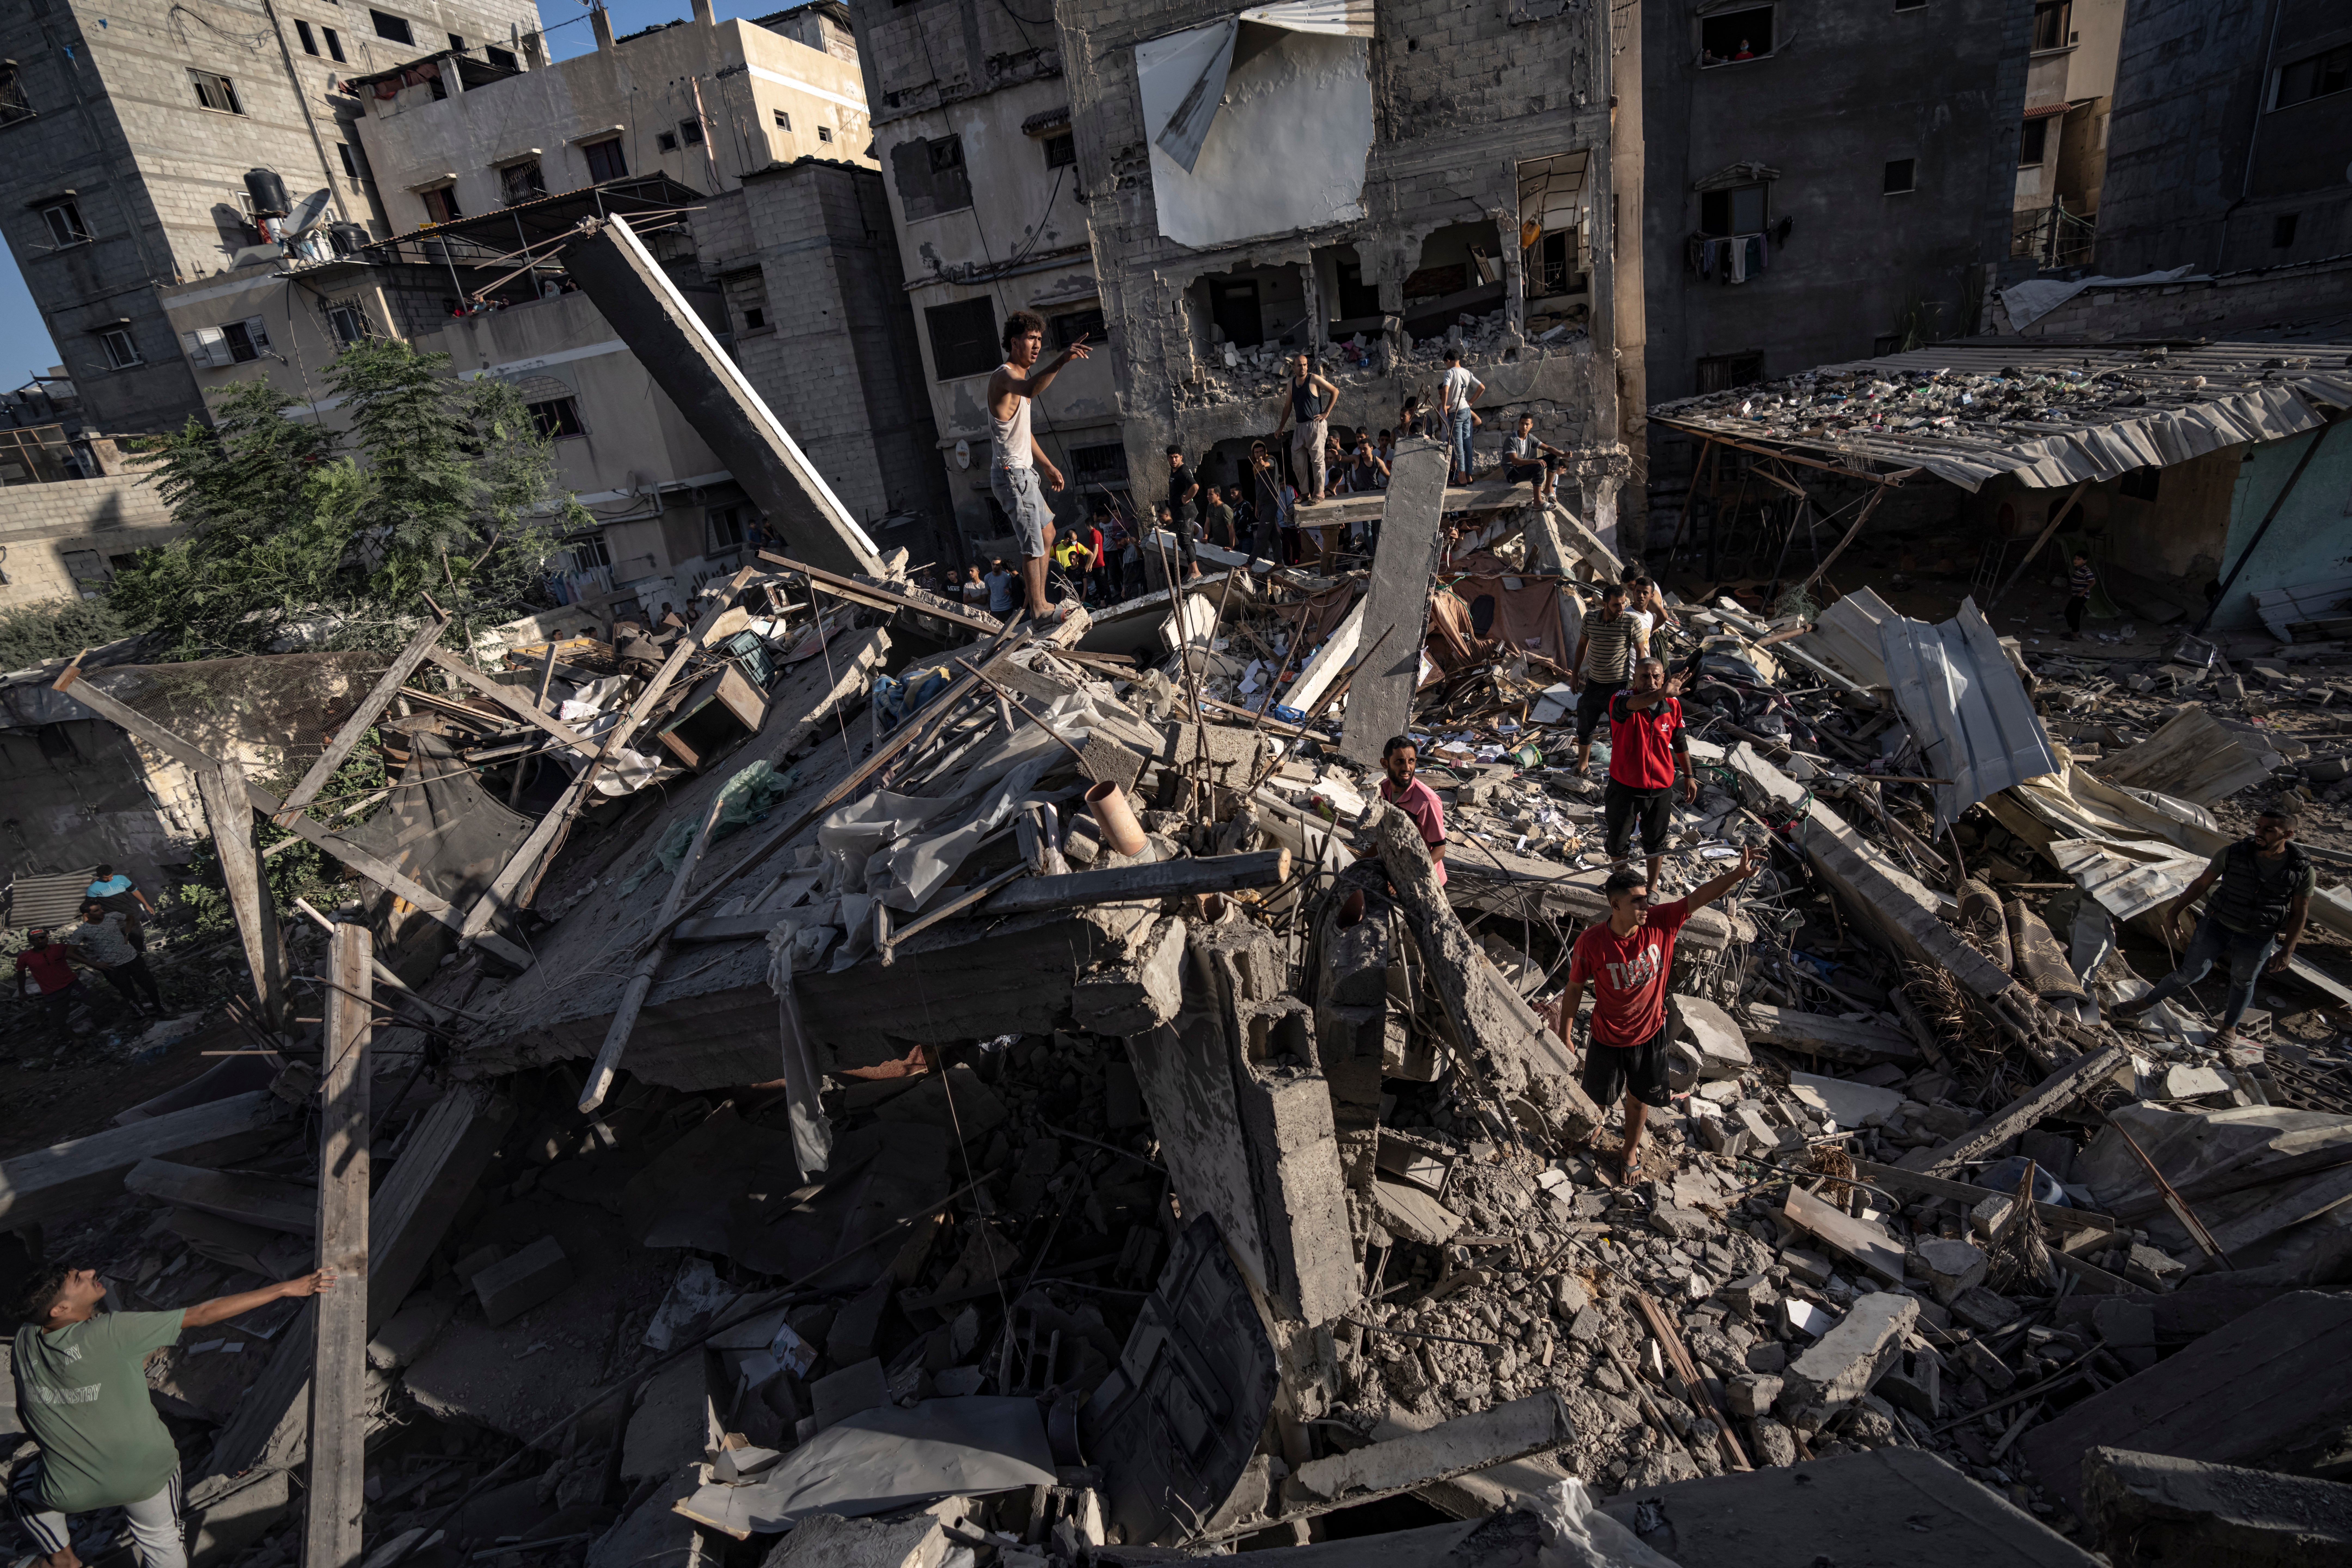 Palestinians look at the destruction after Israeli strikes on the Gaza Strip in Khan Younis